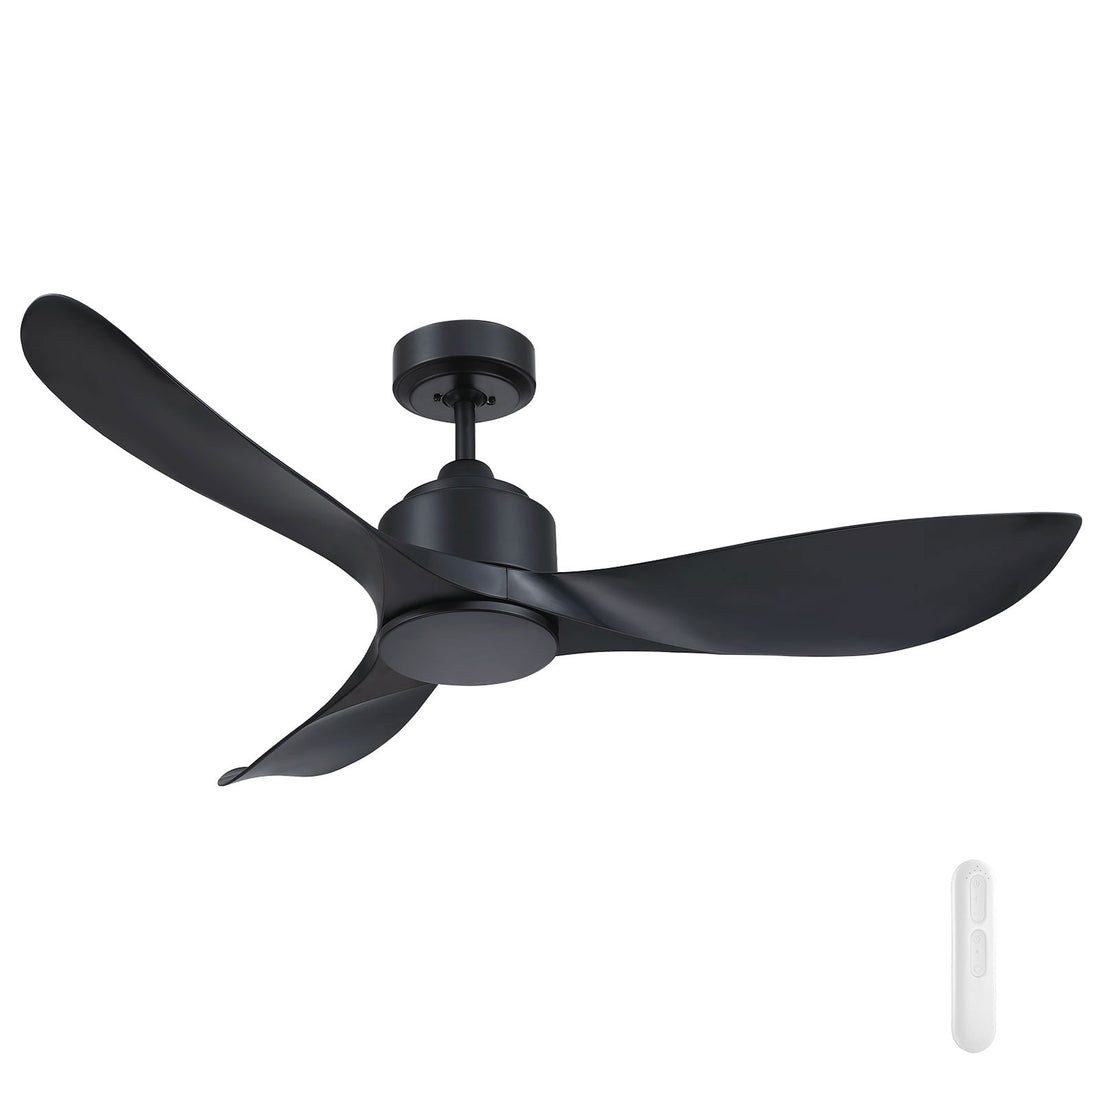 Eagle II Lite 122cm DC Ceiling Fan with Remote